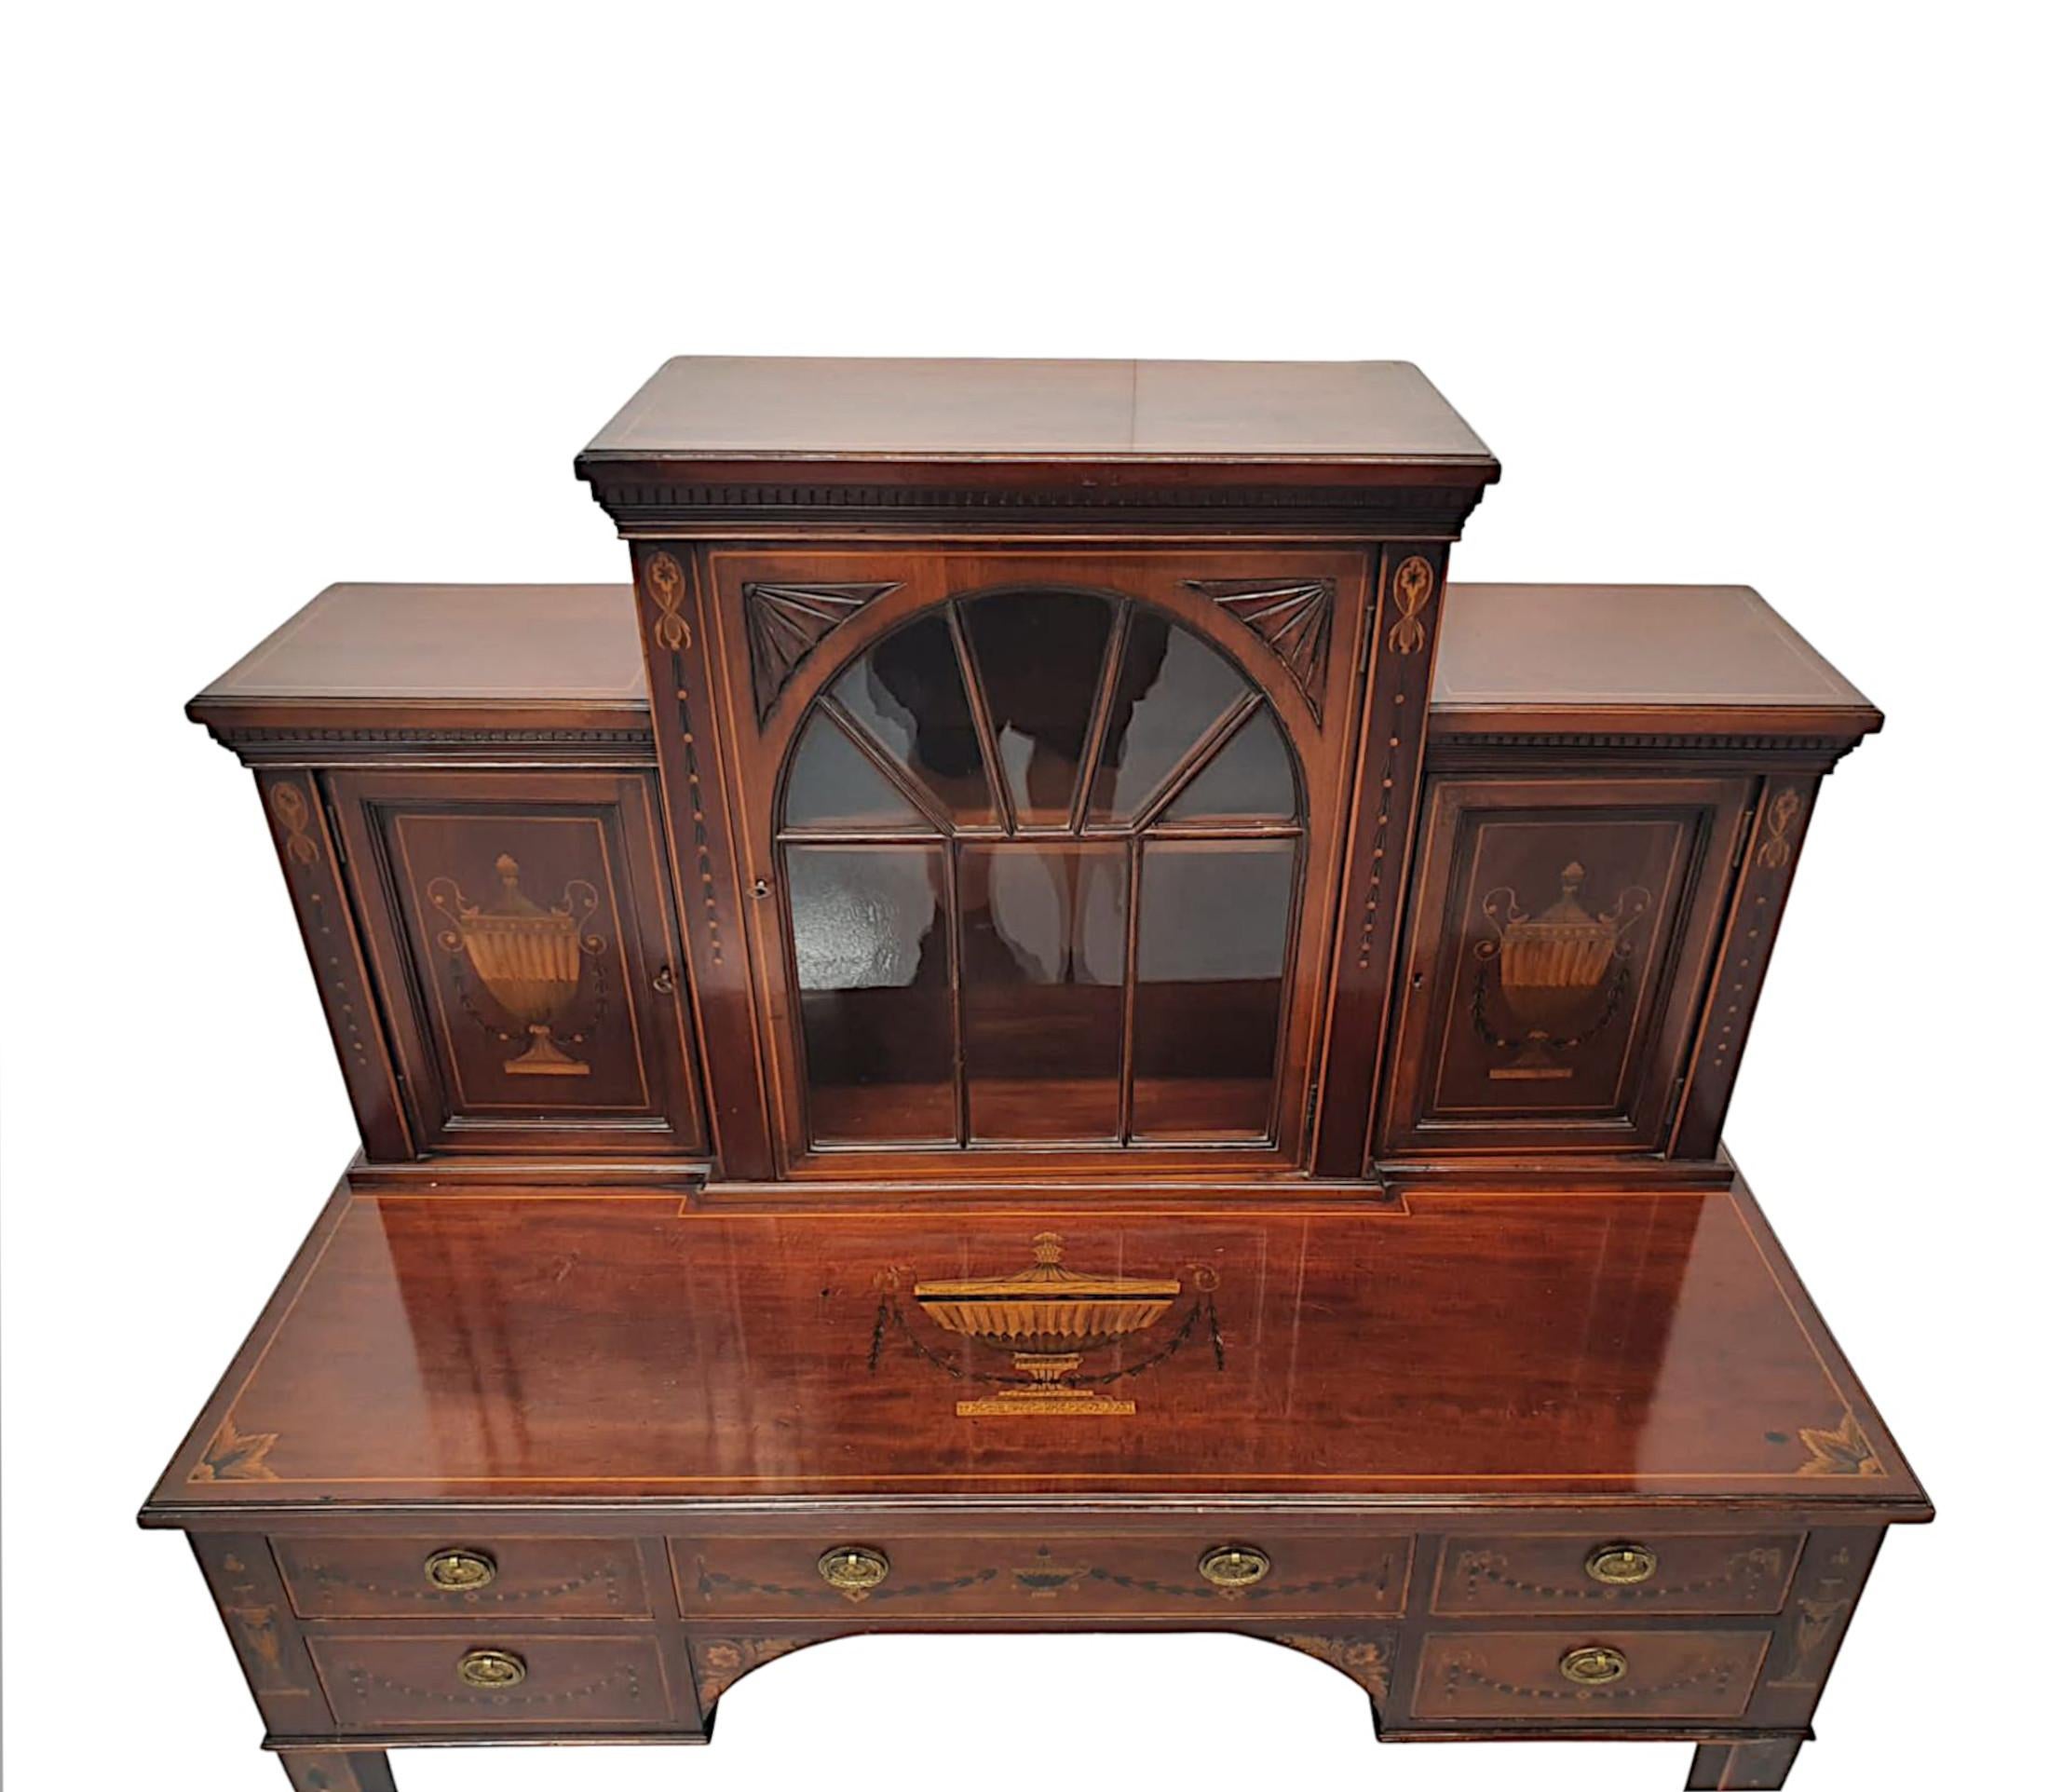 Brass Very Fine Edwardian Marquetry Inlaid Table or Cabinet by Shoolbred of London For Sale